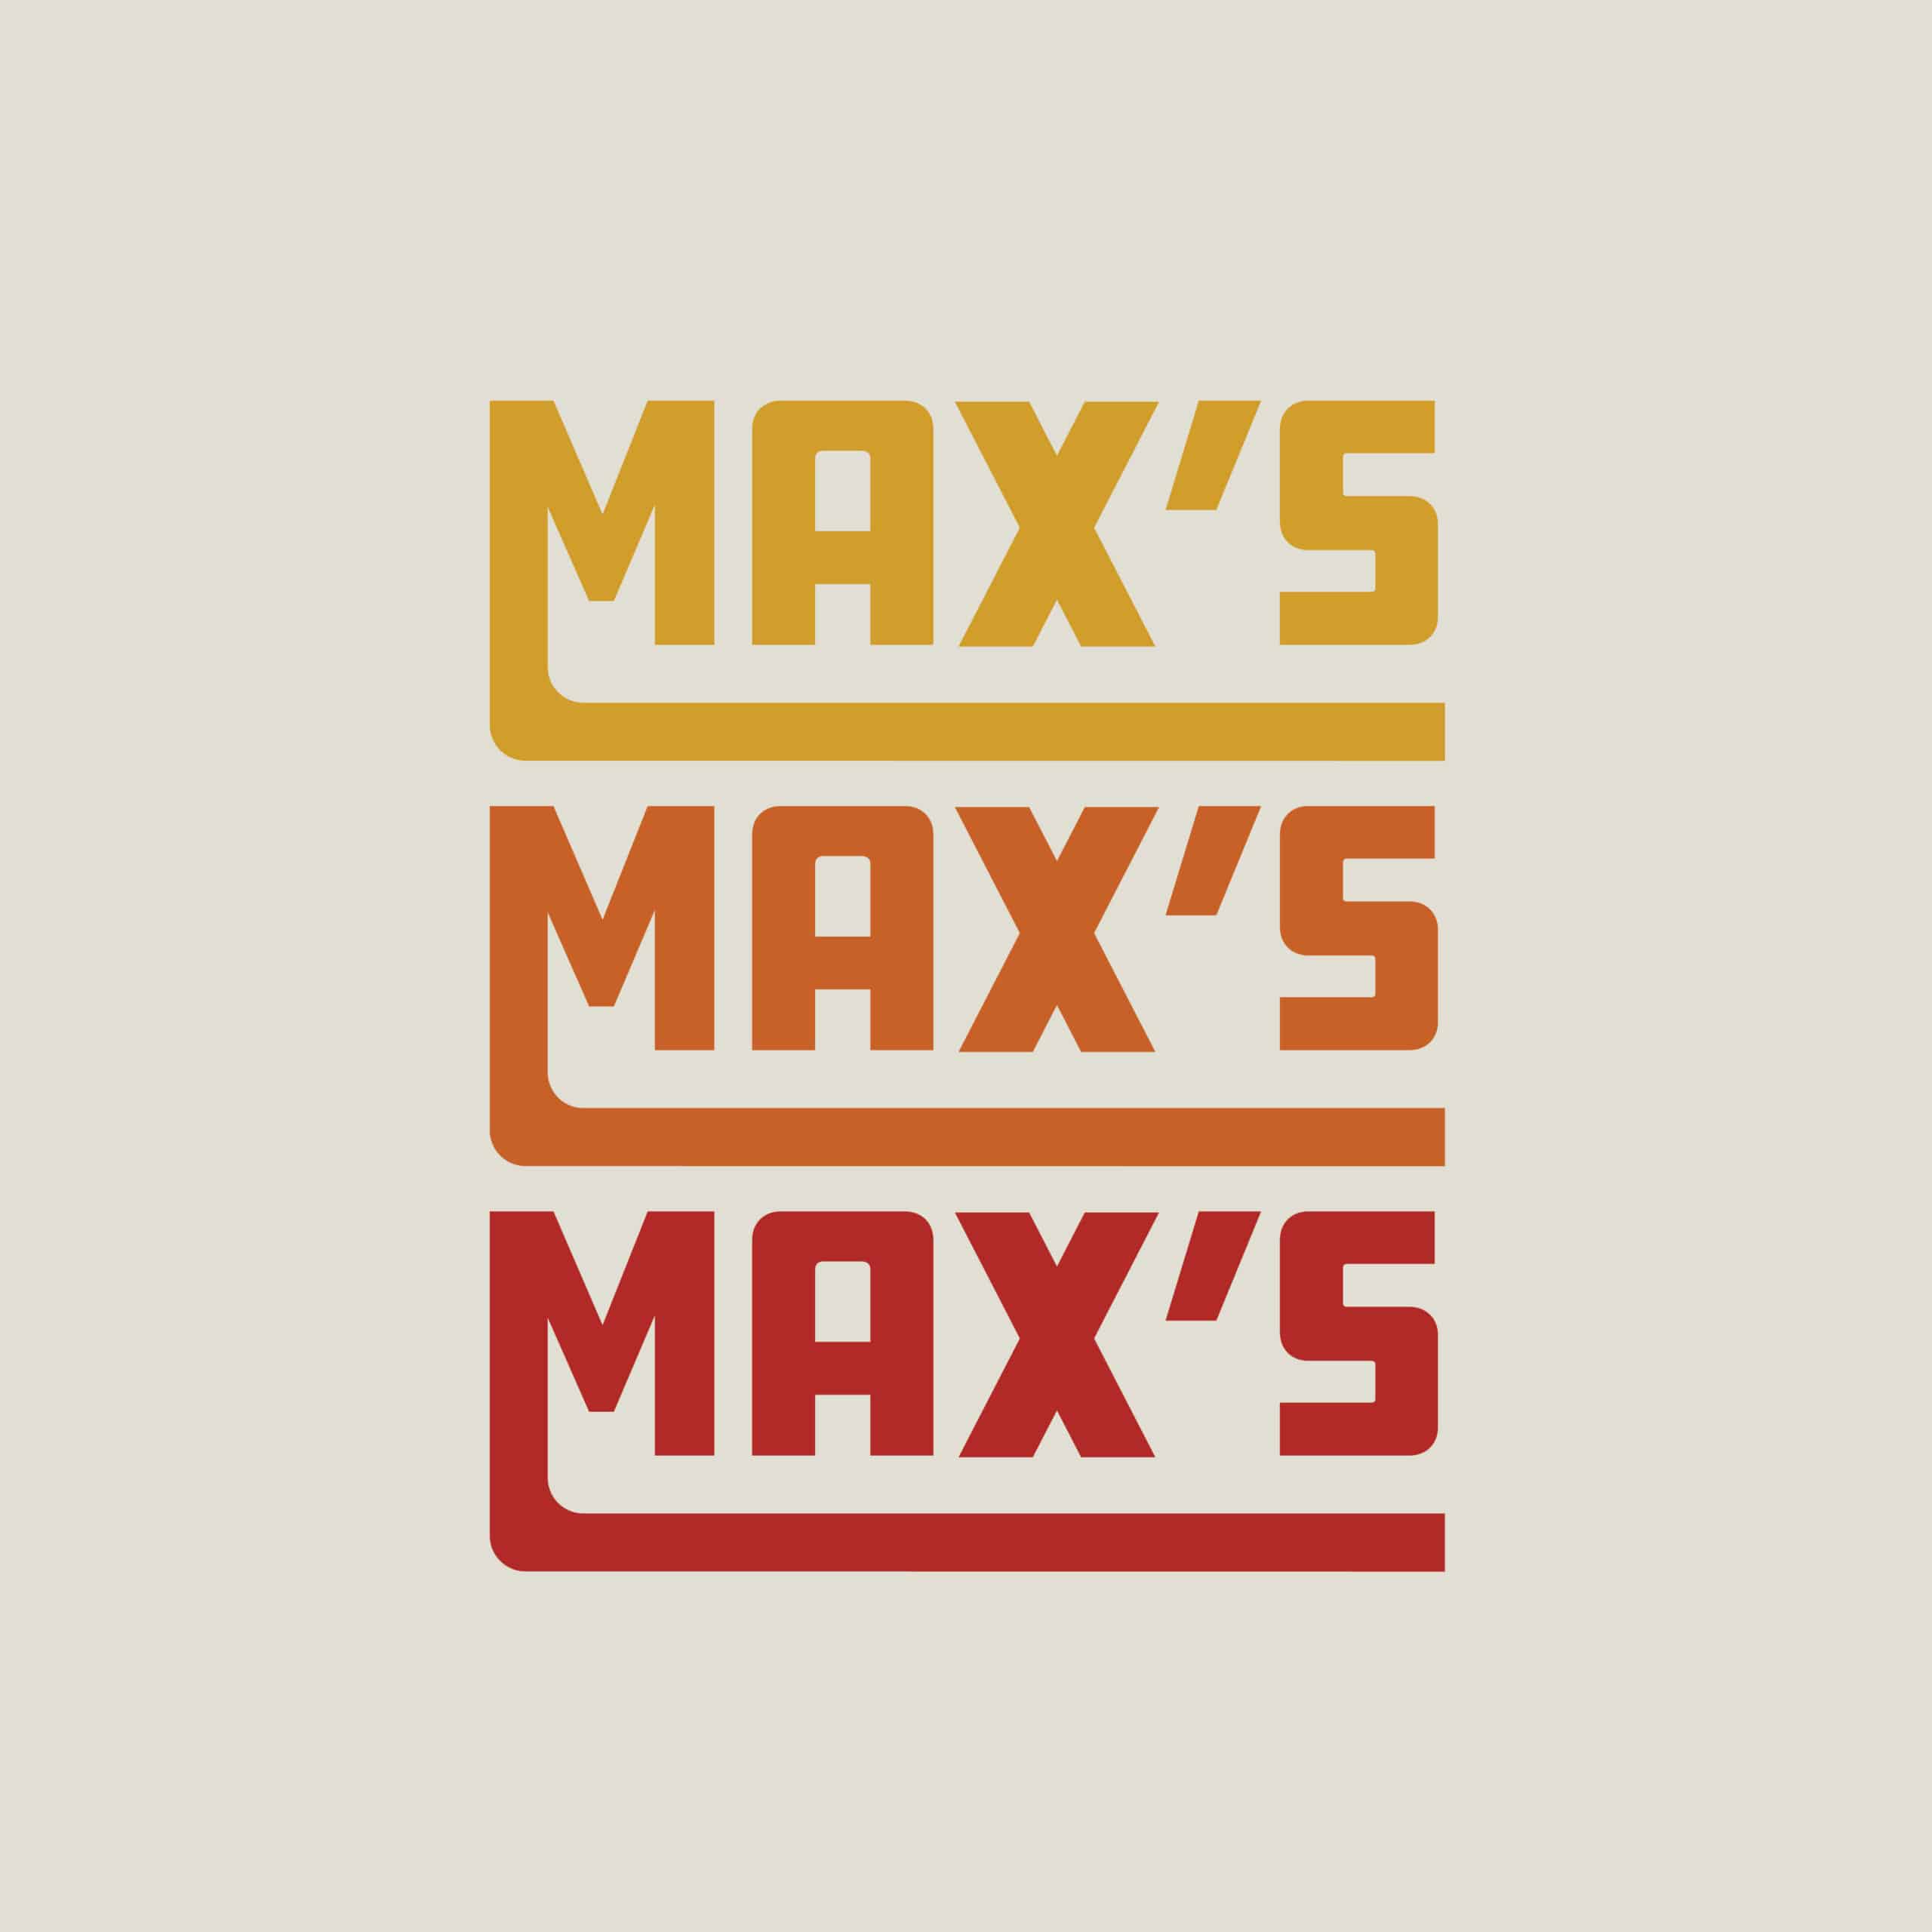 Maxs sports grill in Huntington Beach rebrand for hospitality groups by Stellen design branding and logo design agency in Los Angeles California